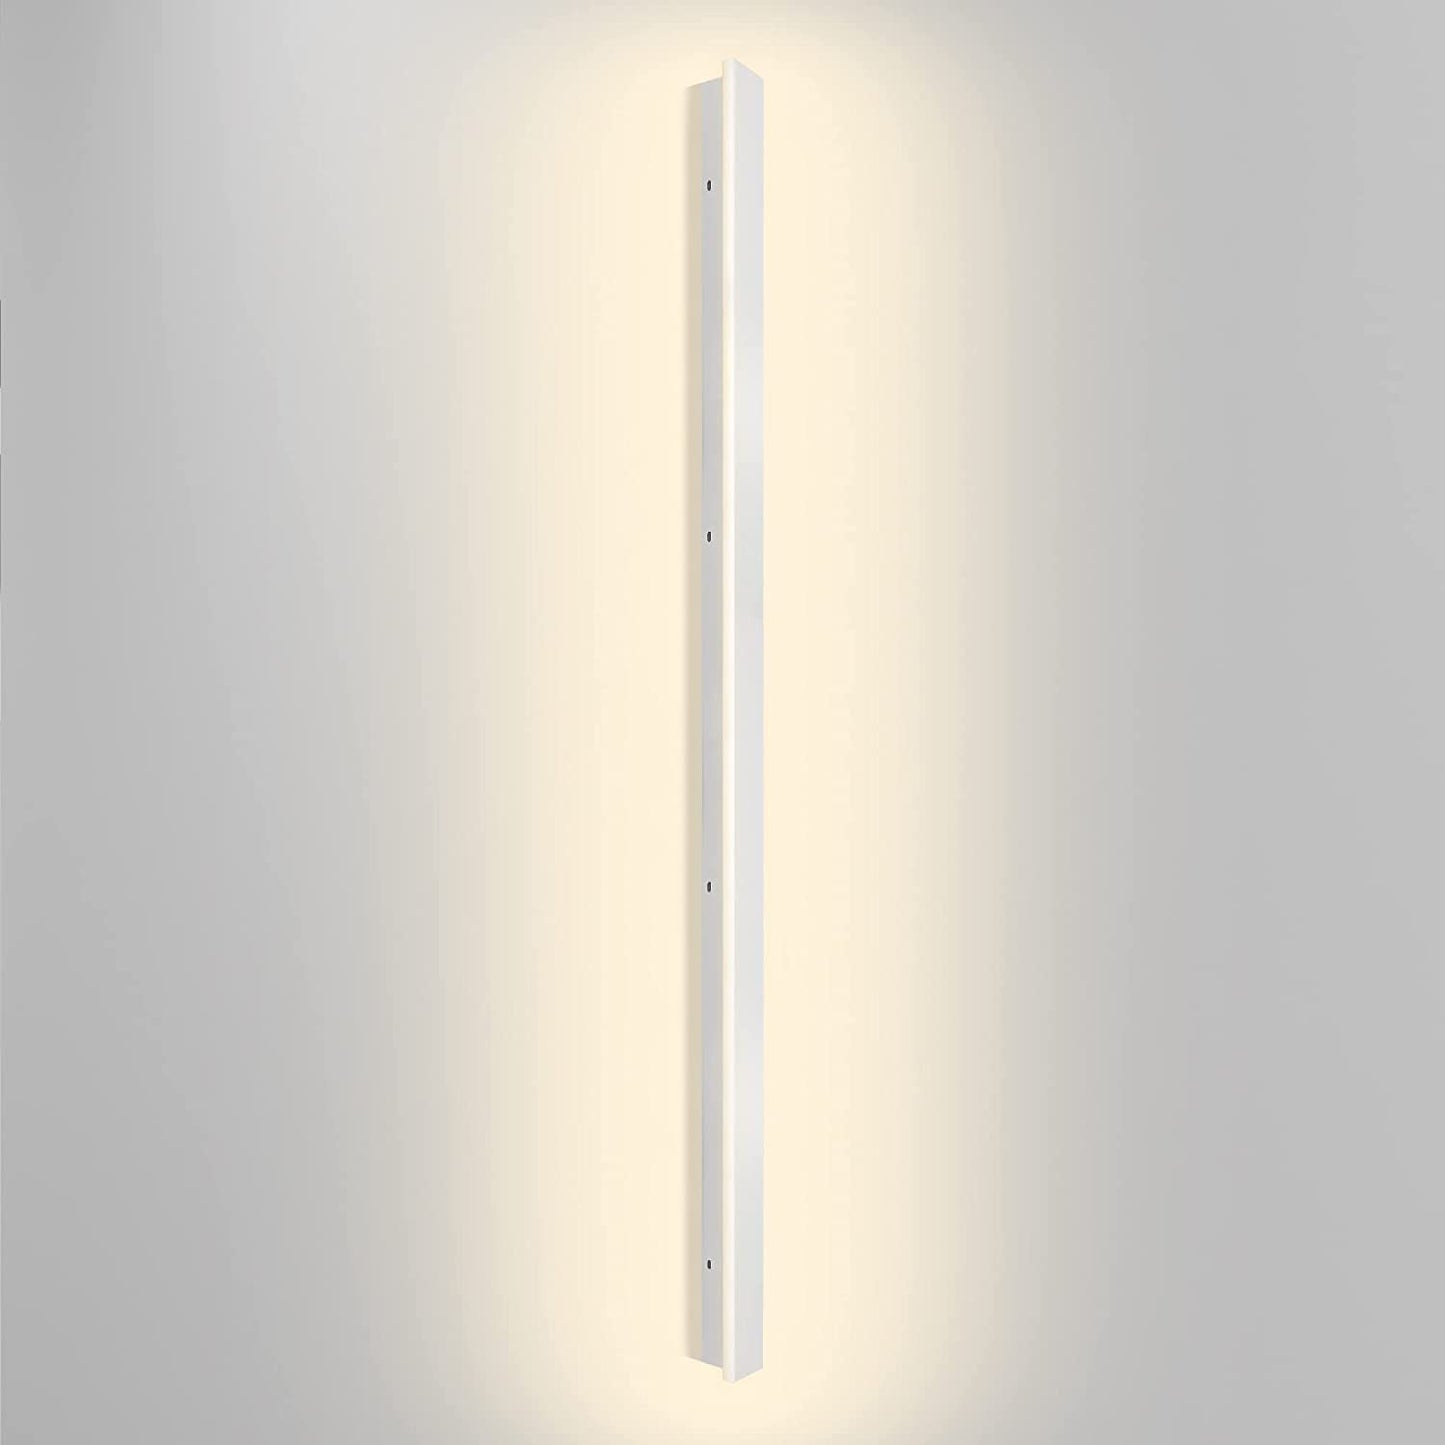 Outdoor Wall Light Bar Lamp - 60 inch - White